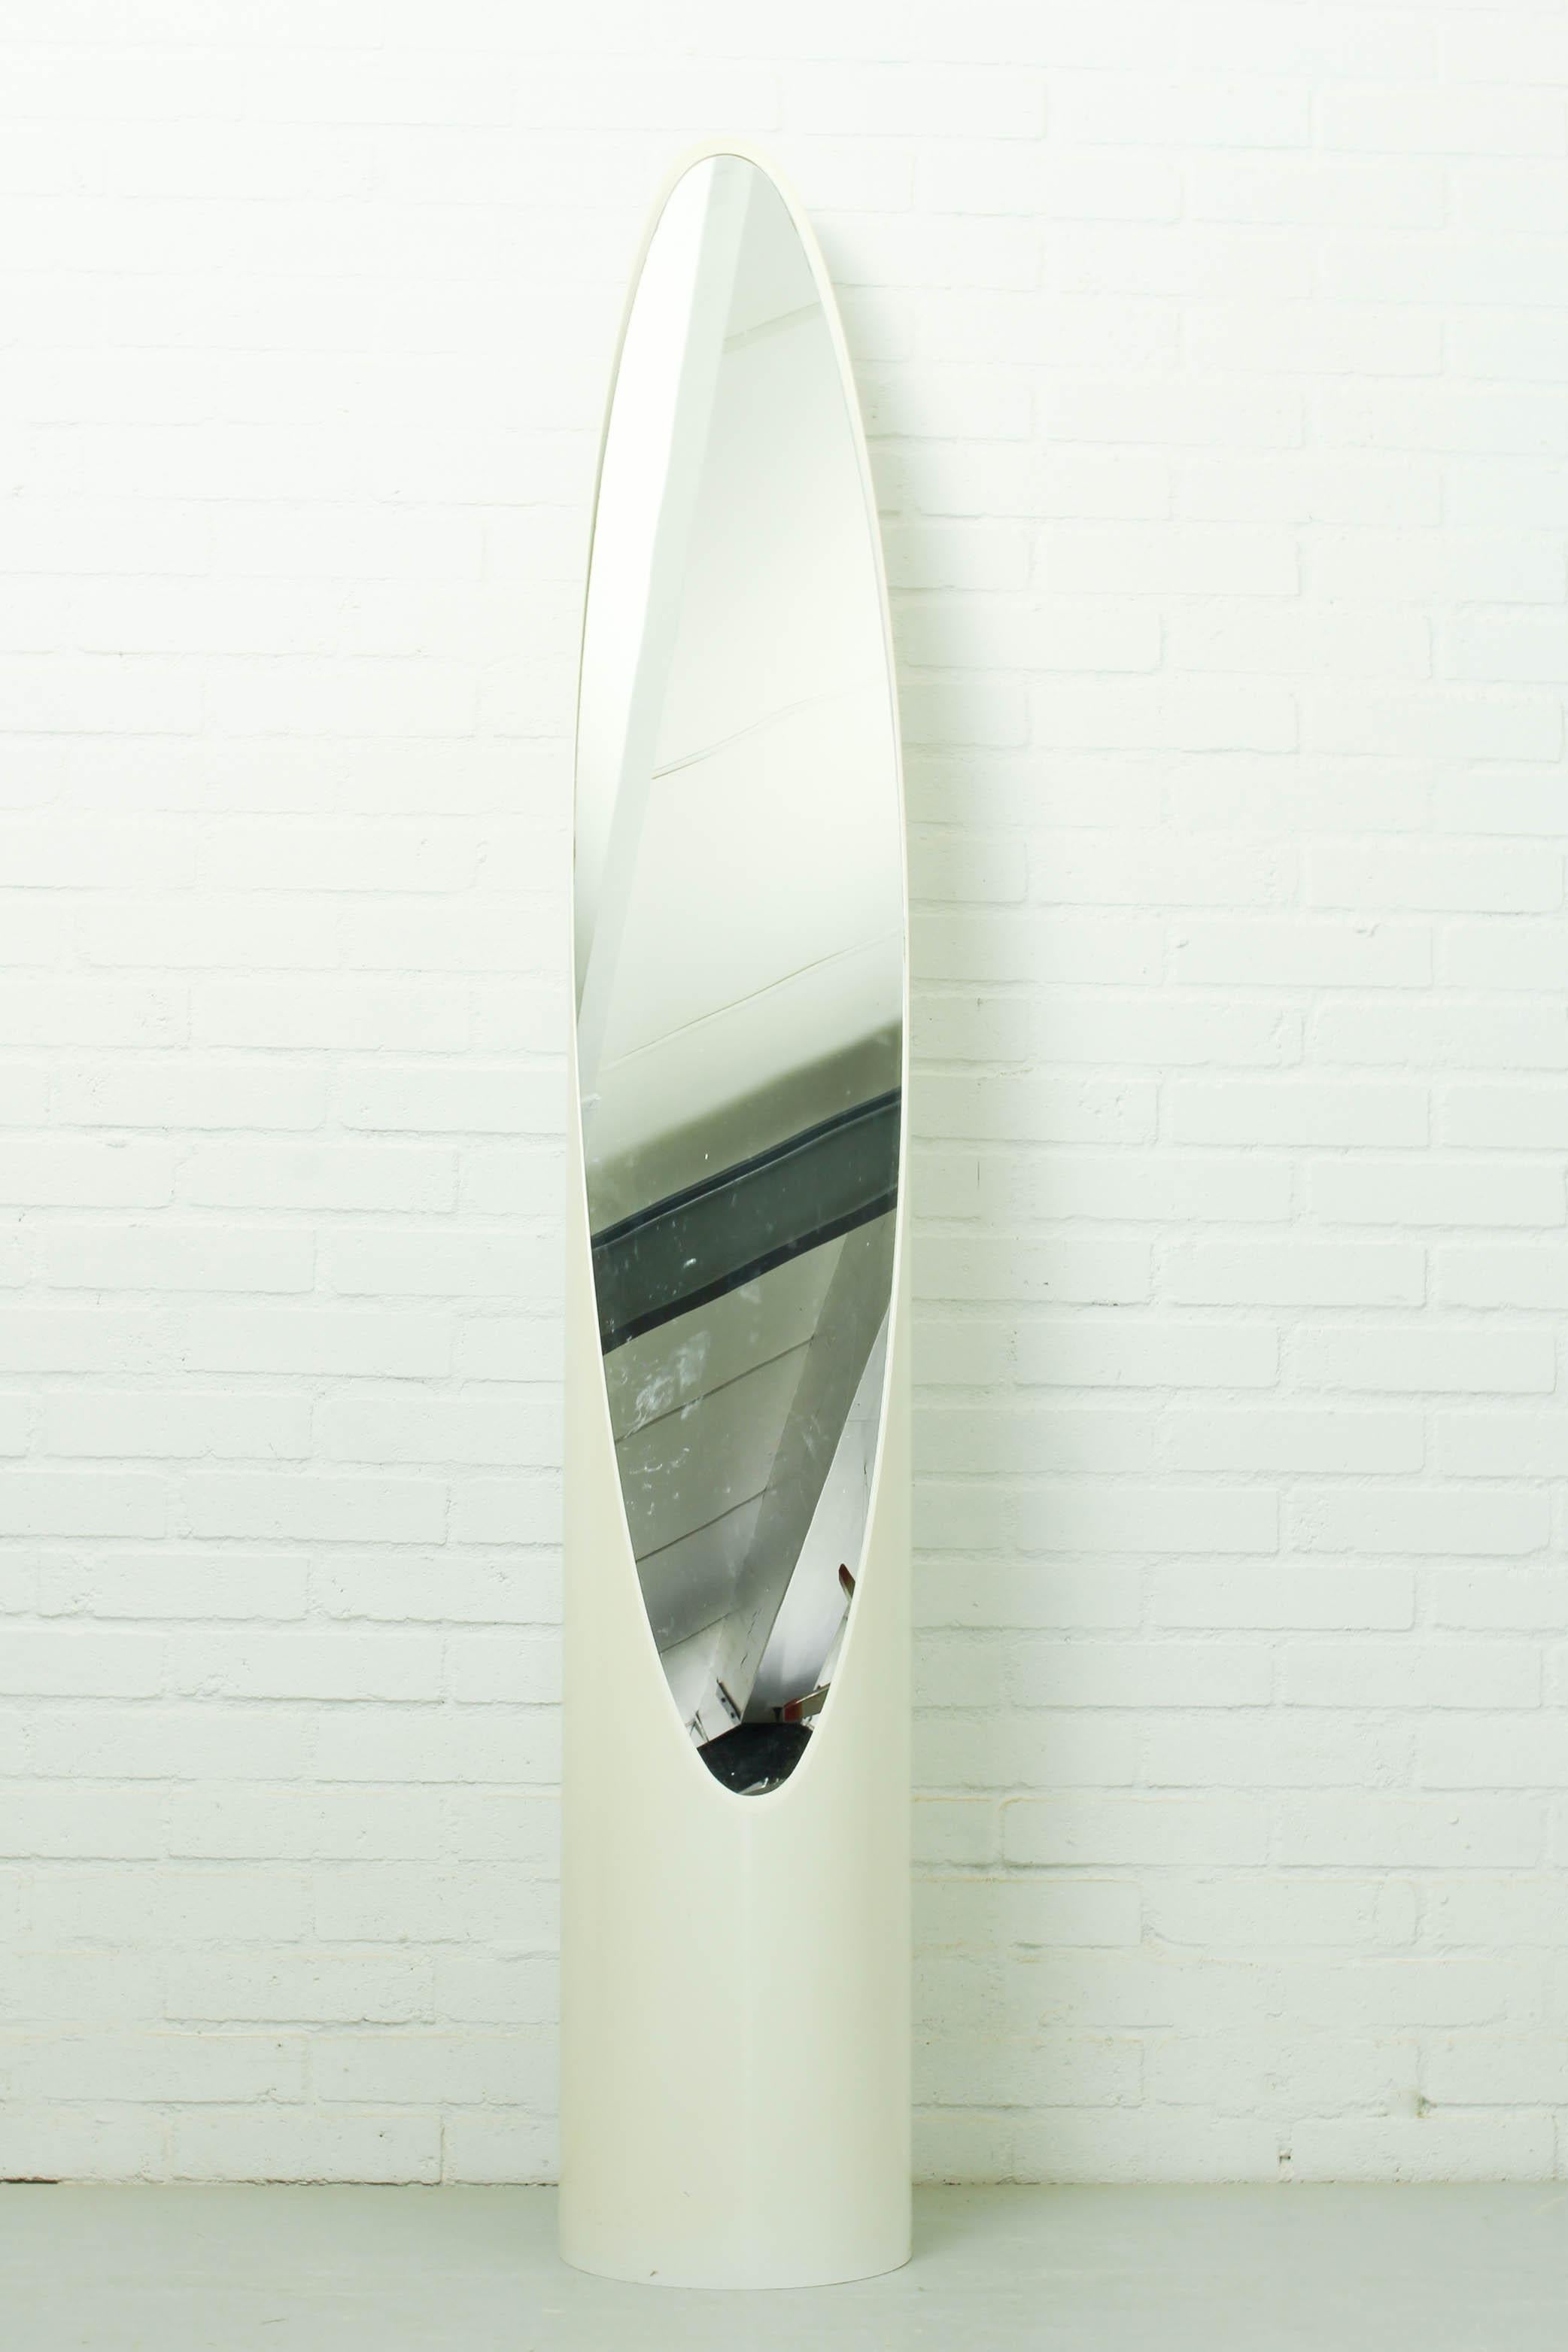 Unghia mirror designed by Rodolfo Bonetto, Italy, 1970s. Unghia means 'nail' in Italian, but the mirror is also referred to as 